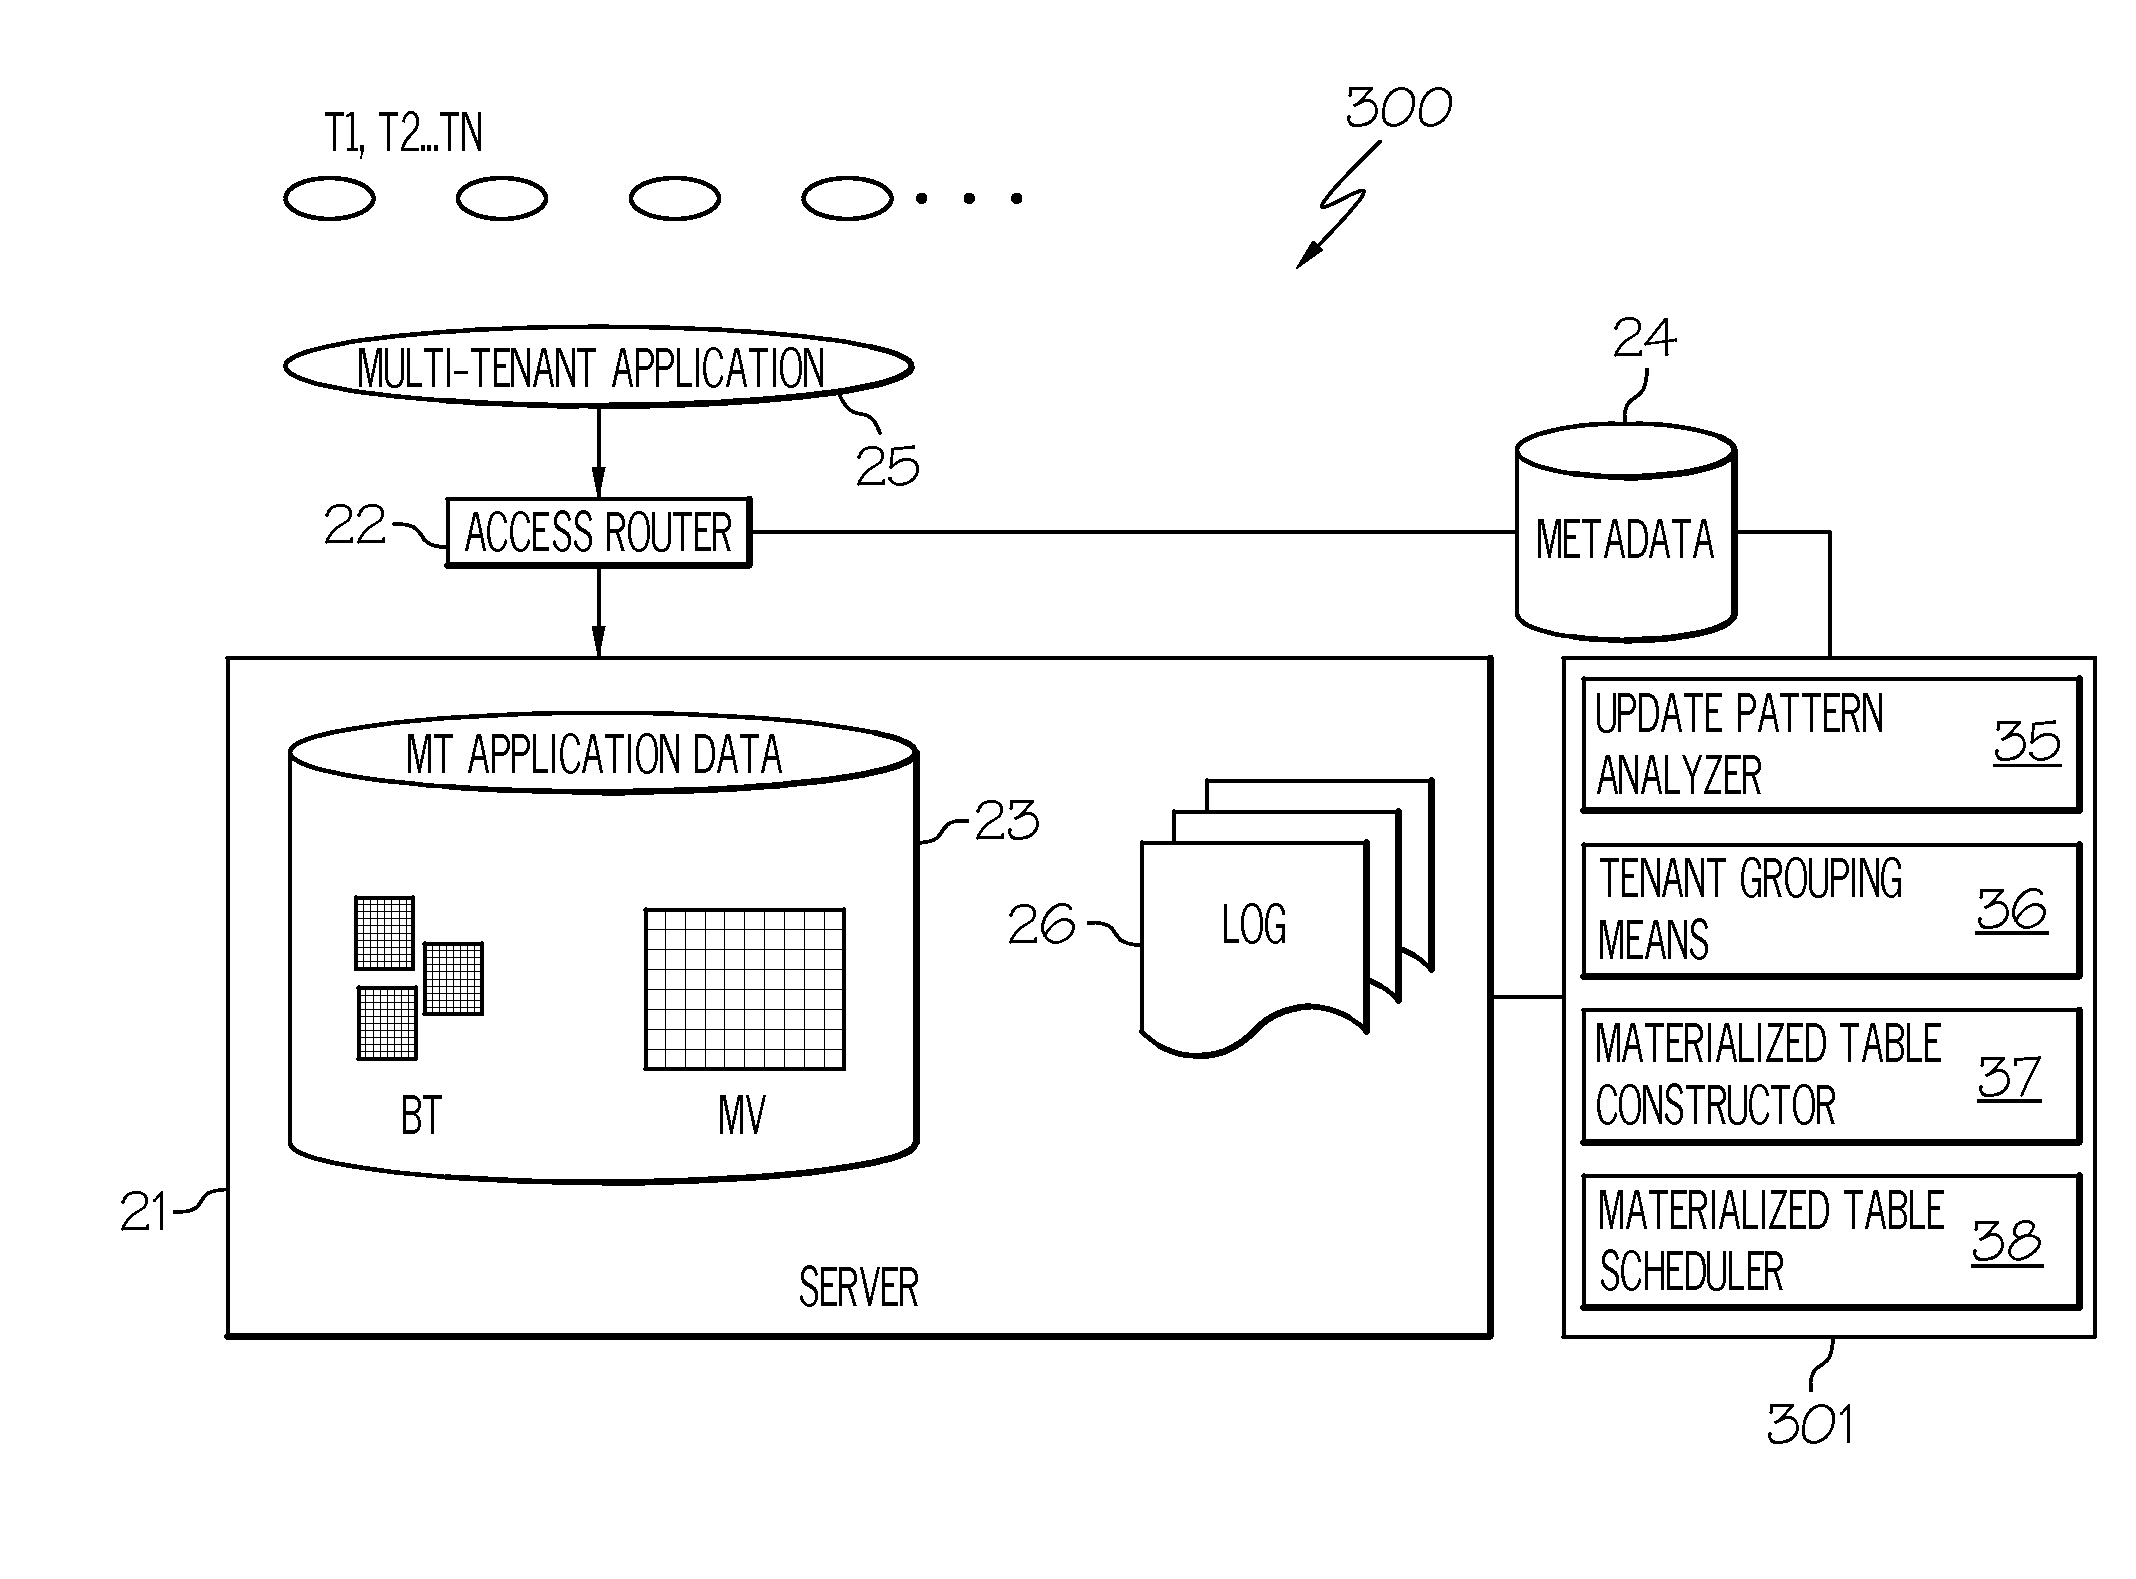 Apparatus for processing materialized tables in a multi-tenant application system